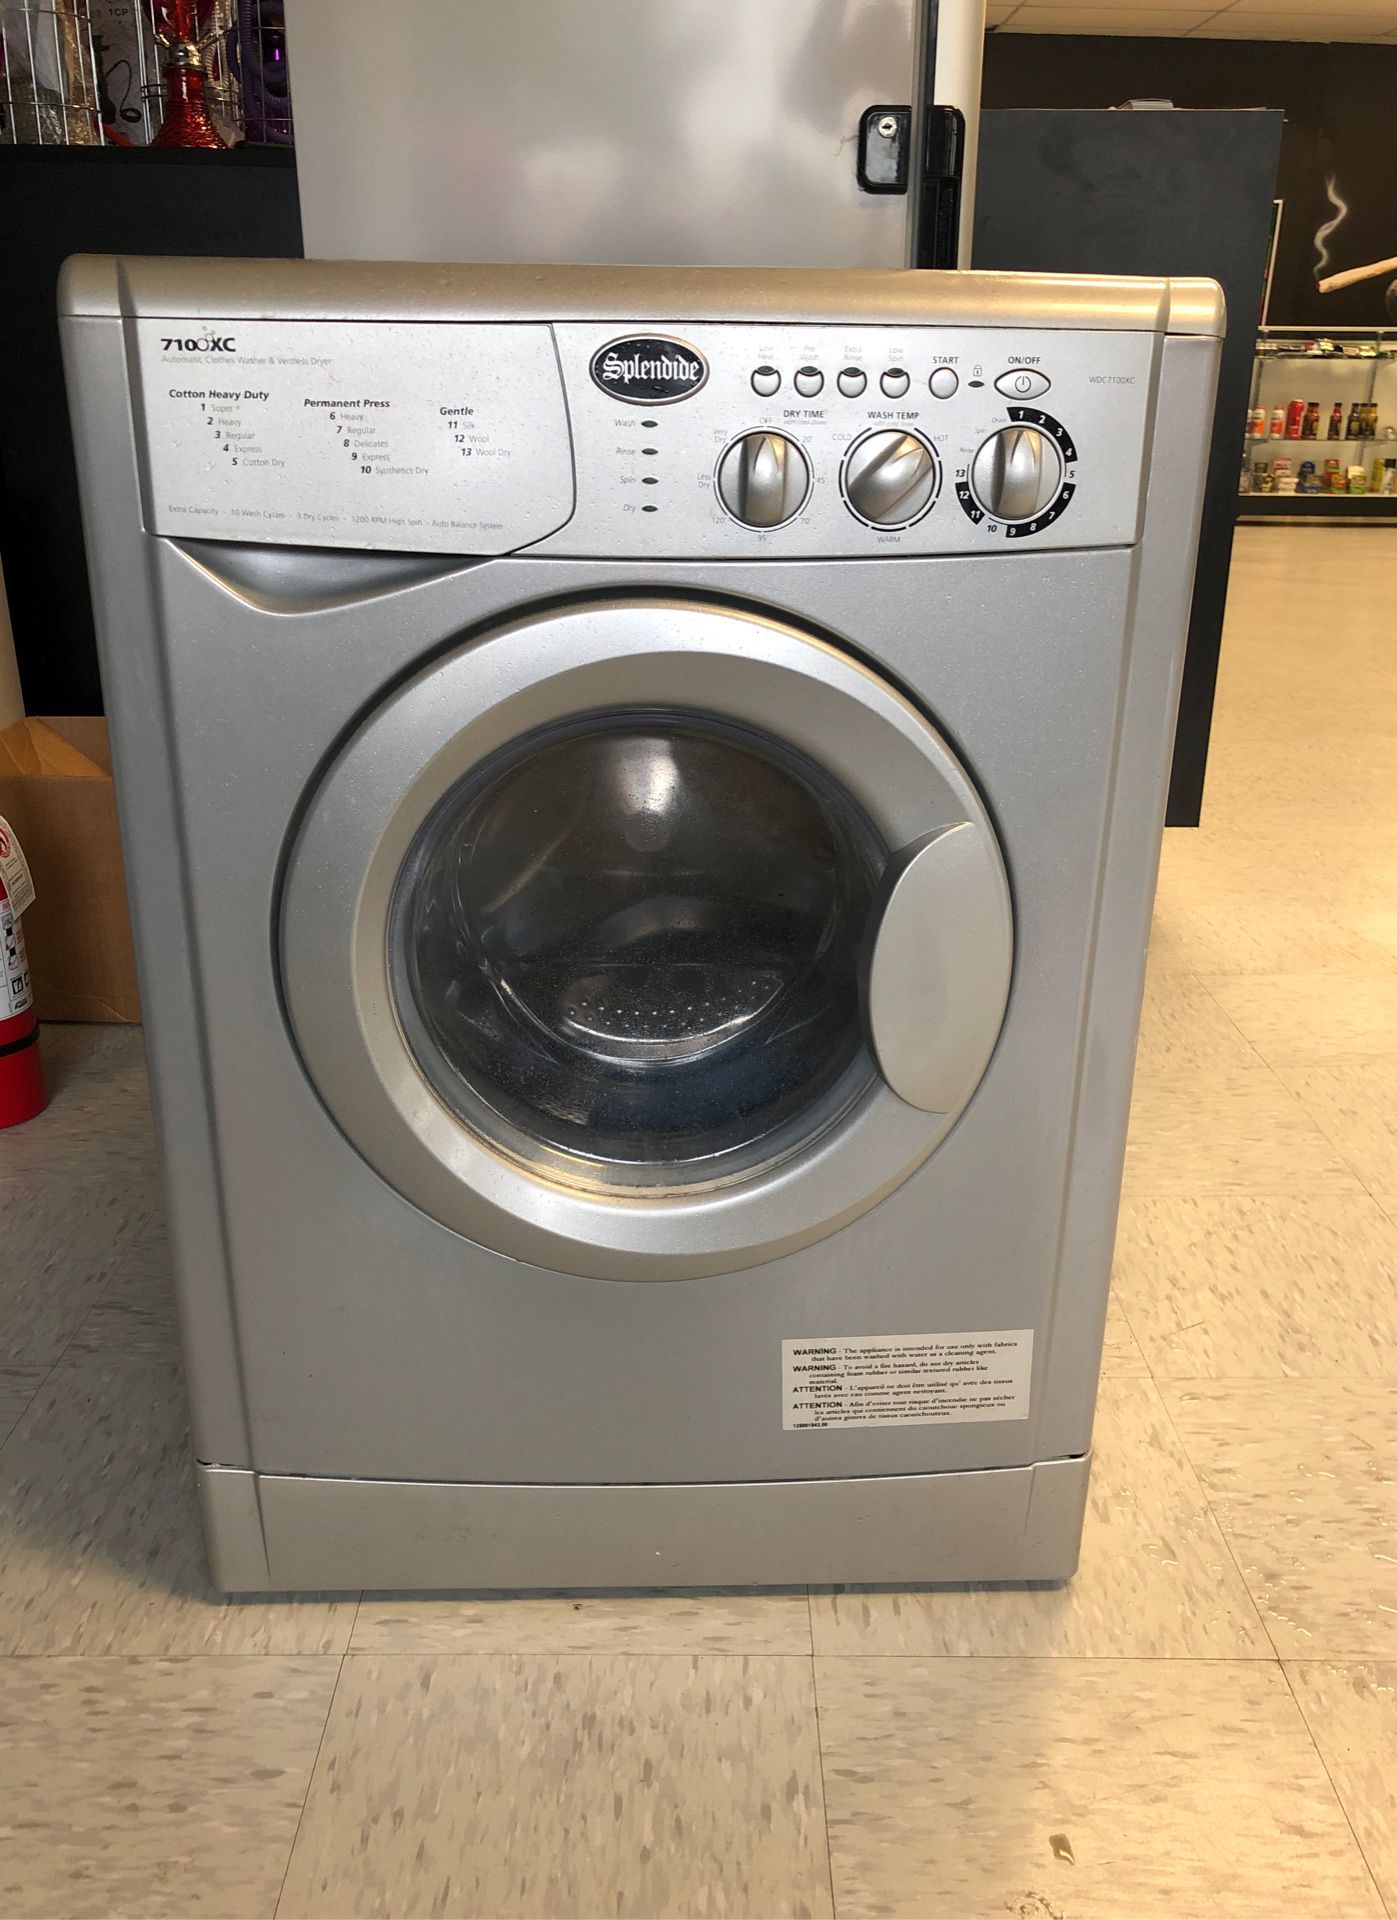 WASHER & DRYER UNIT ALL IN ONE !!